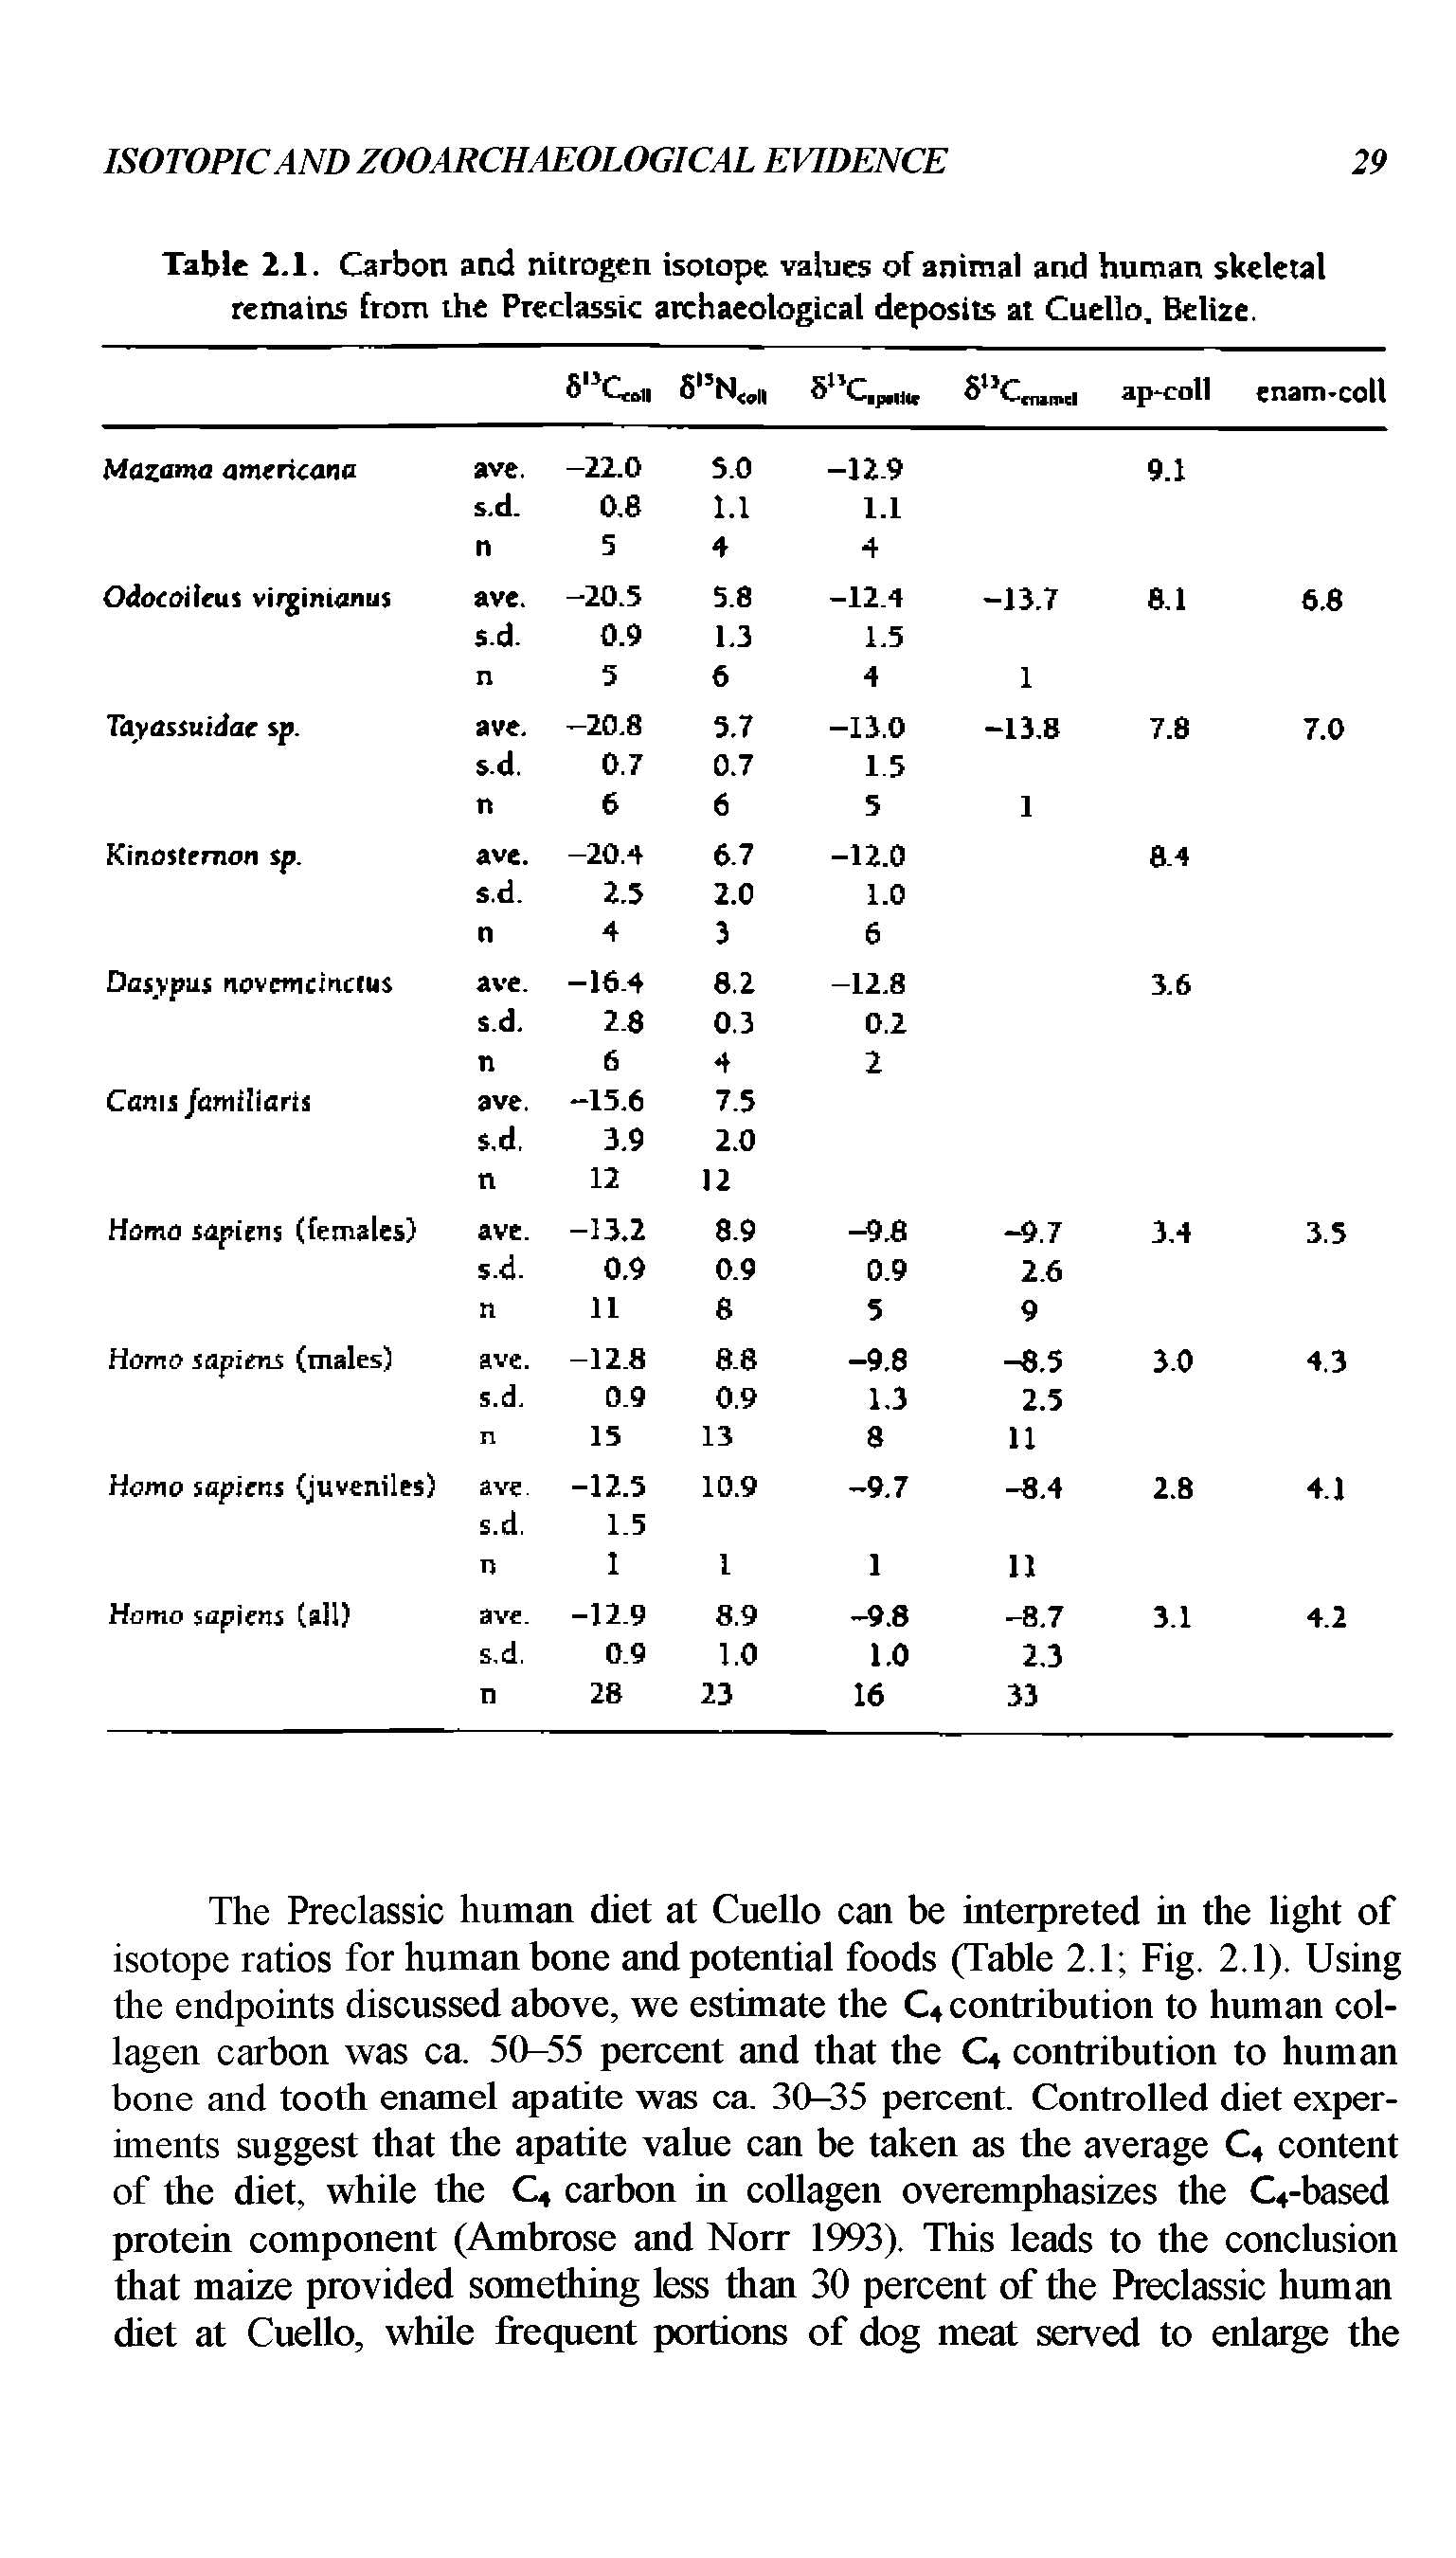 Table 2.1. Carbon and nitrogen isotope values of animal and human skeletal remains from the Predassic archaeological deposits at Cuello. Belize.